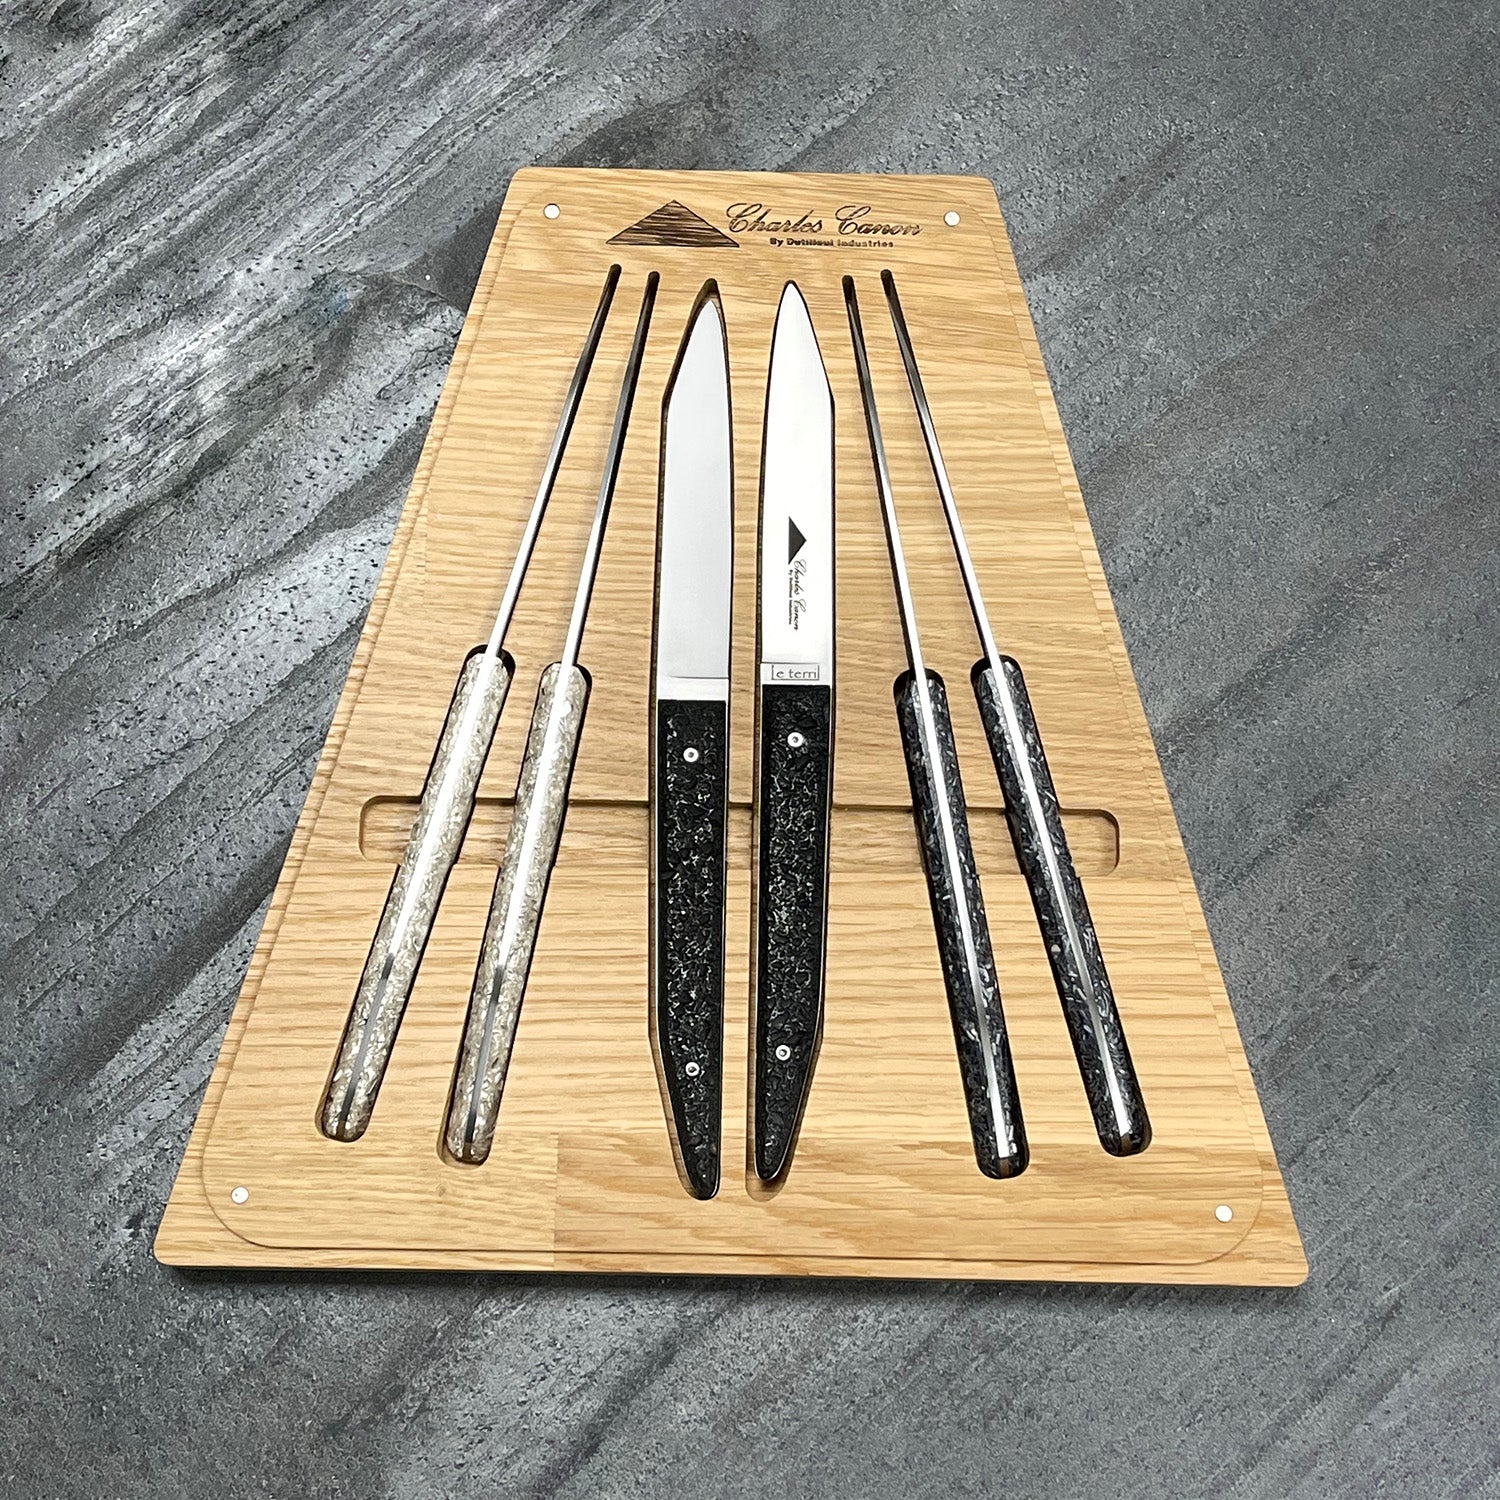 6 table knives with a finishing mix